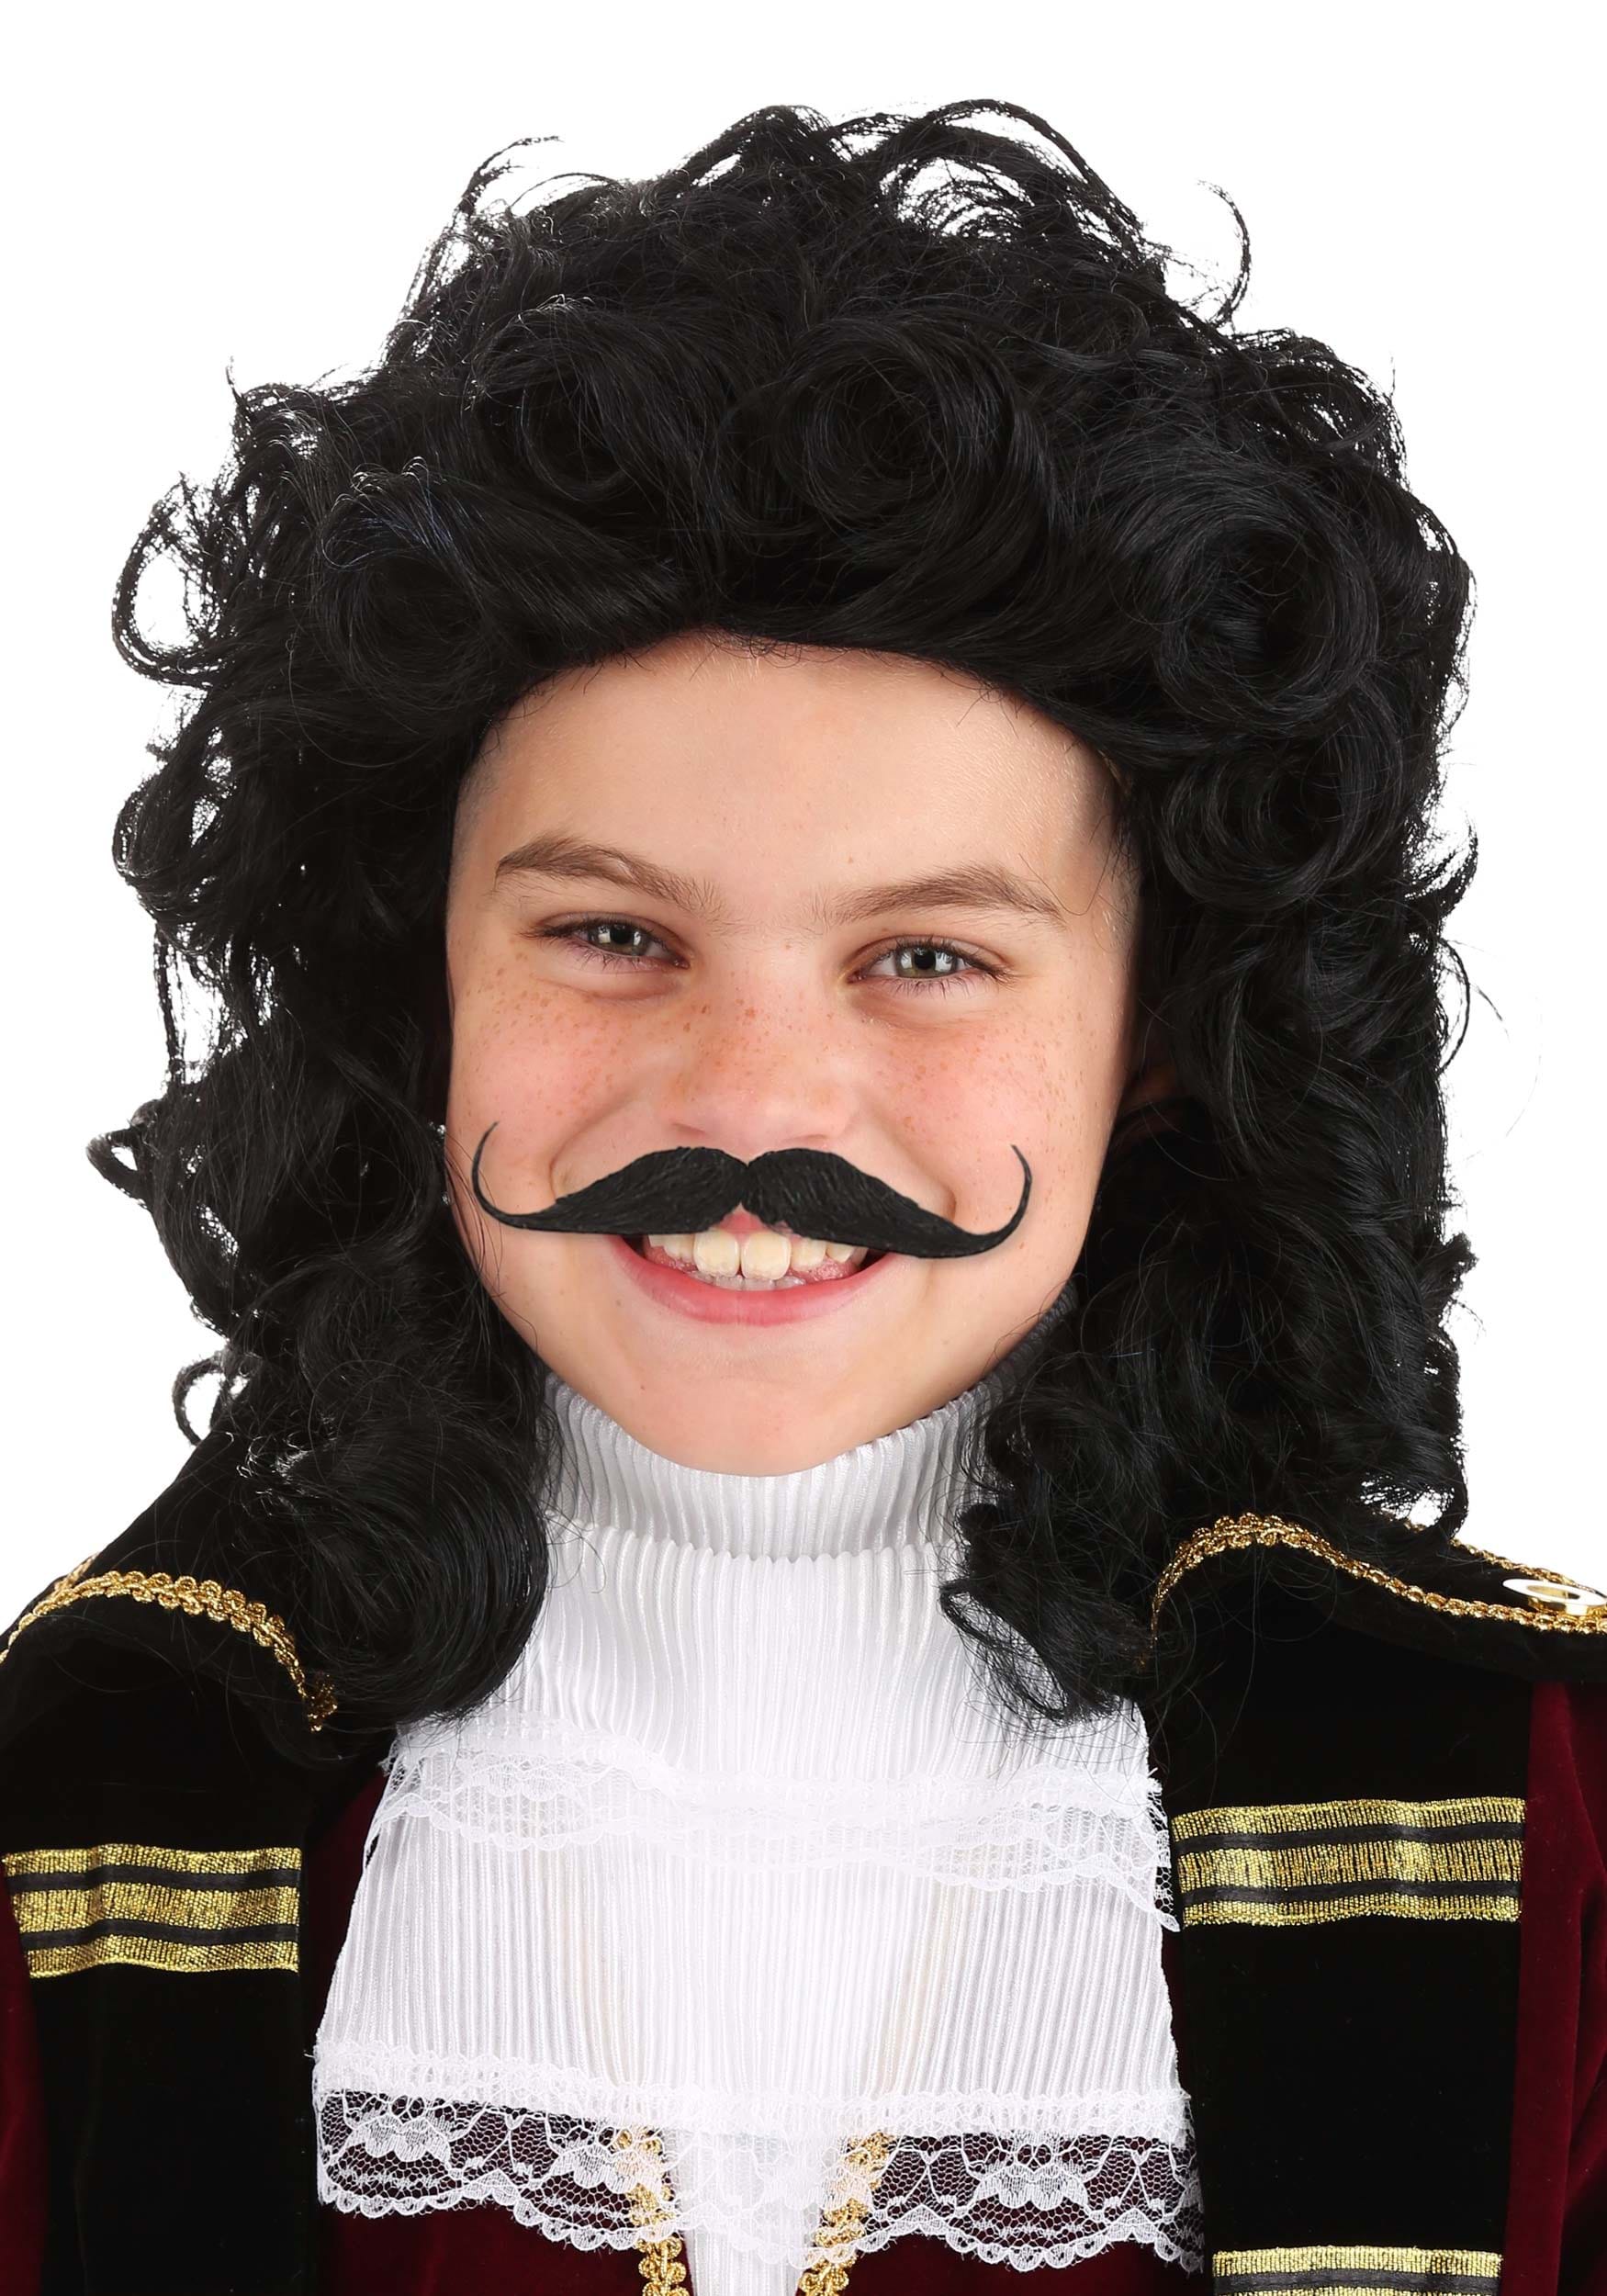 ADULT MALE MENS BLACK LONG CURLY PIRATE CAPTAIN HOOK COSTUME WIG W/ MOUSTACHE 